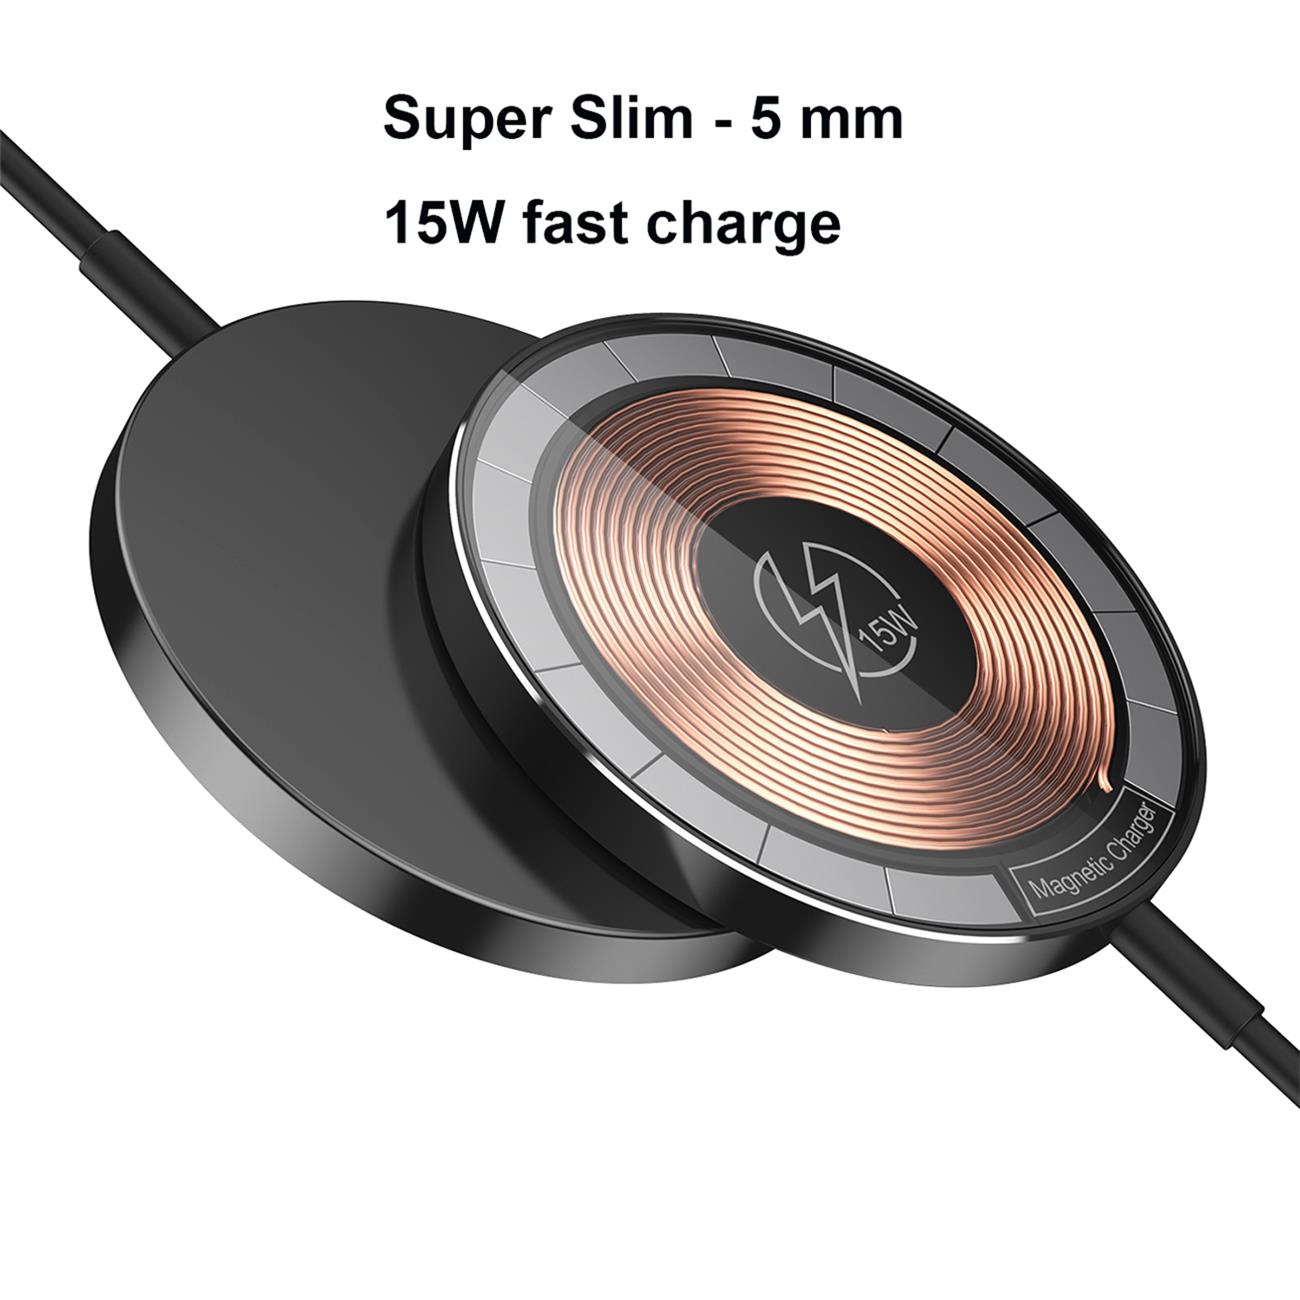 Wireless Charger Super Slim 5mm 15w Fast Charge For Smart Phone